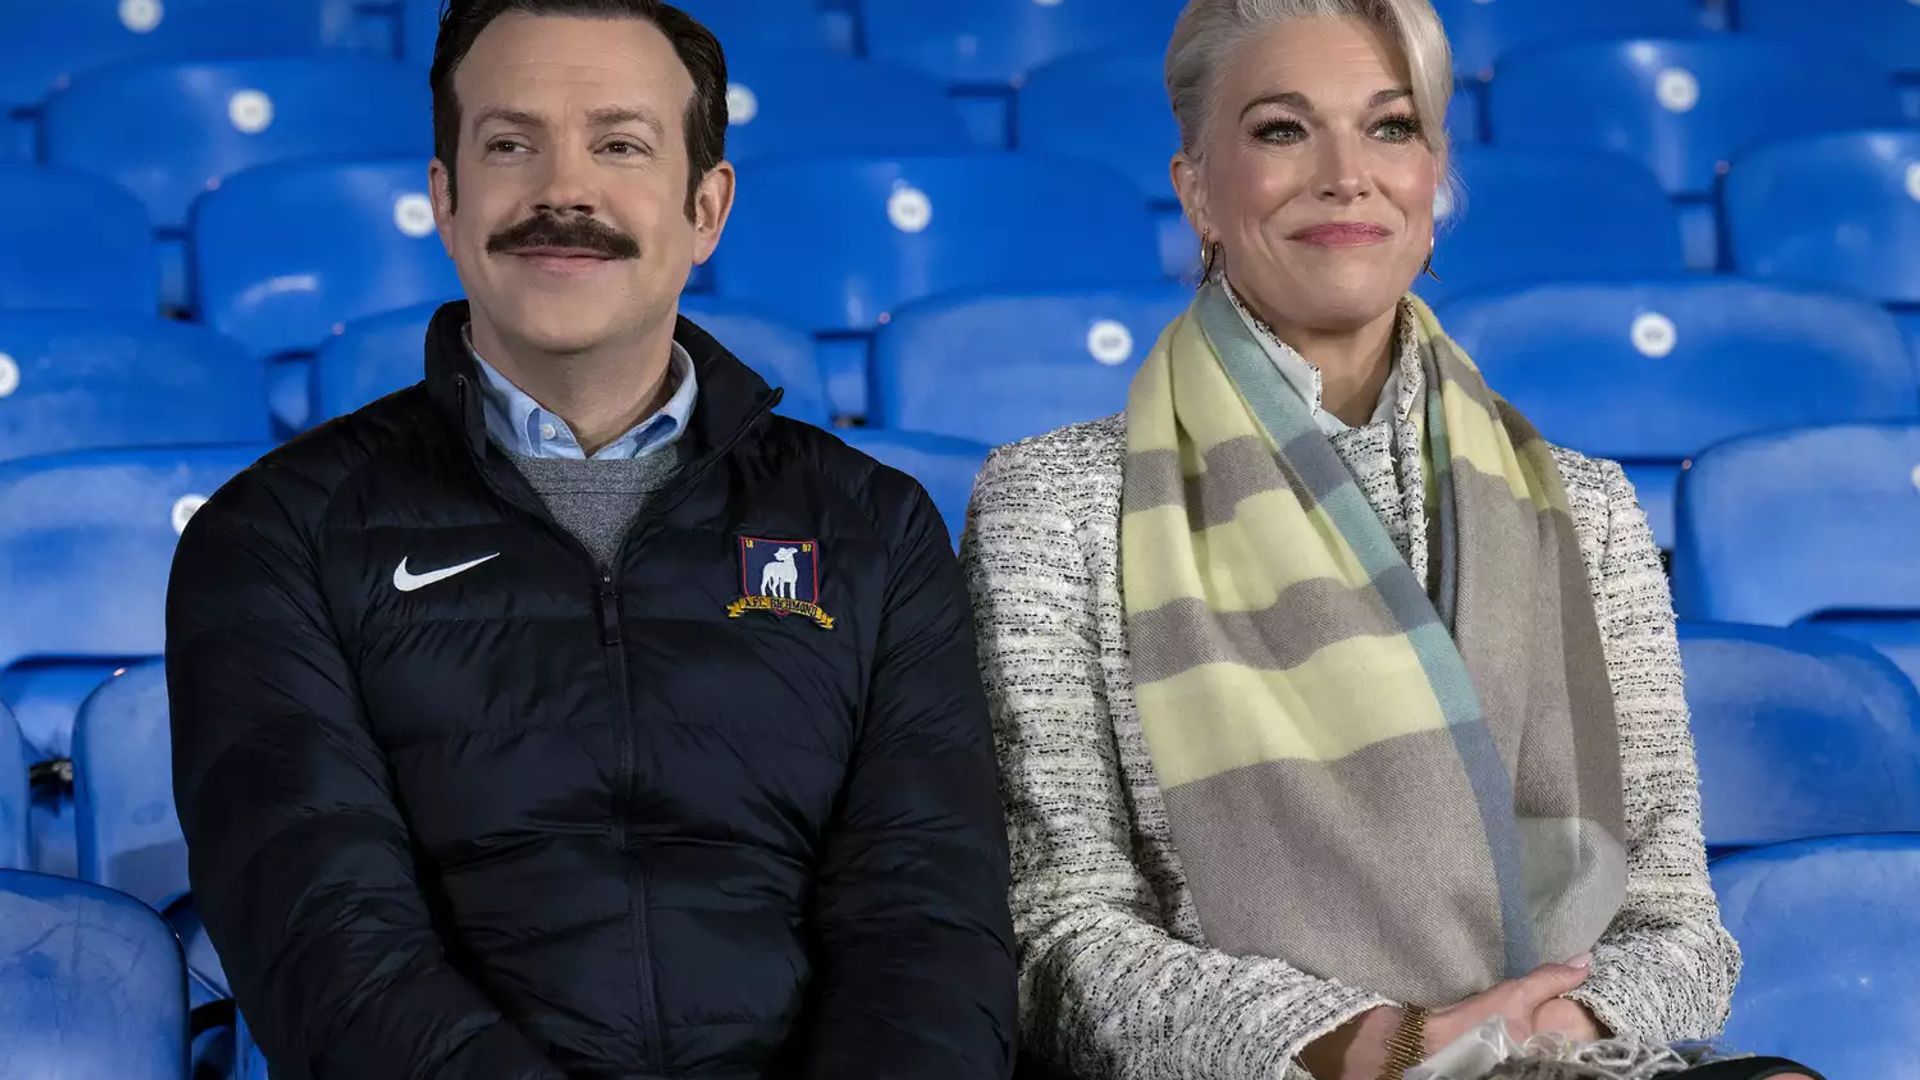 Jason Sudeikis reunites with Hannah Waddingham for emotional moment - see the video